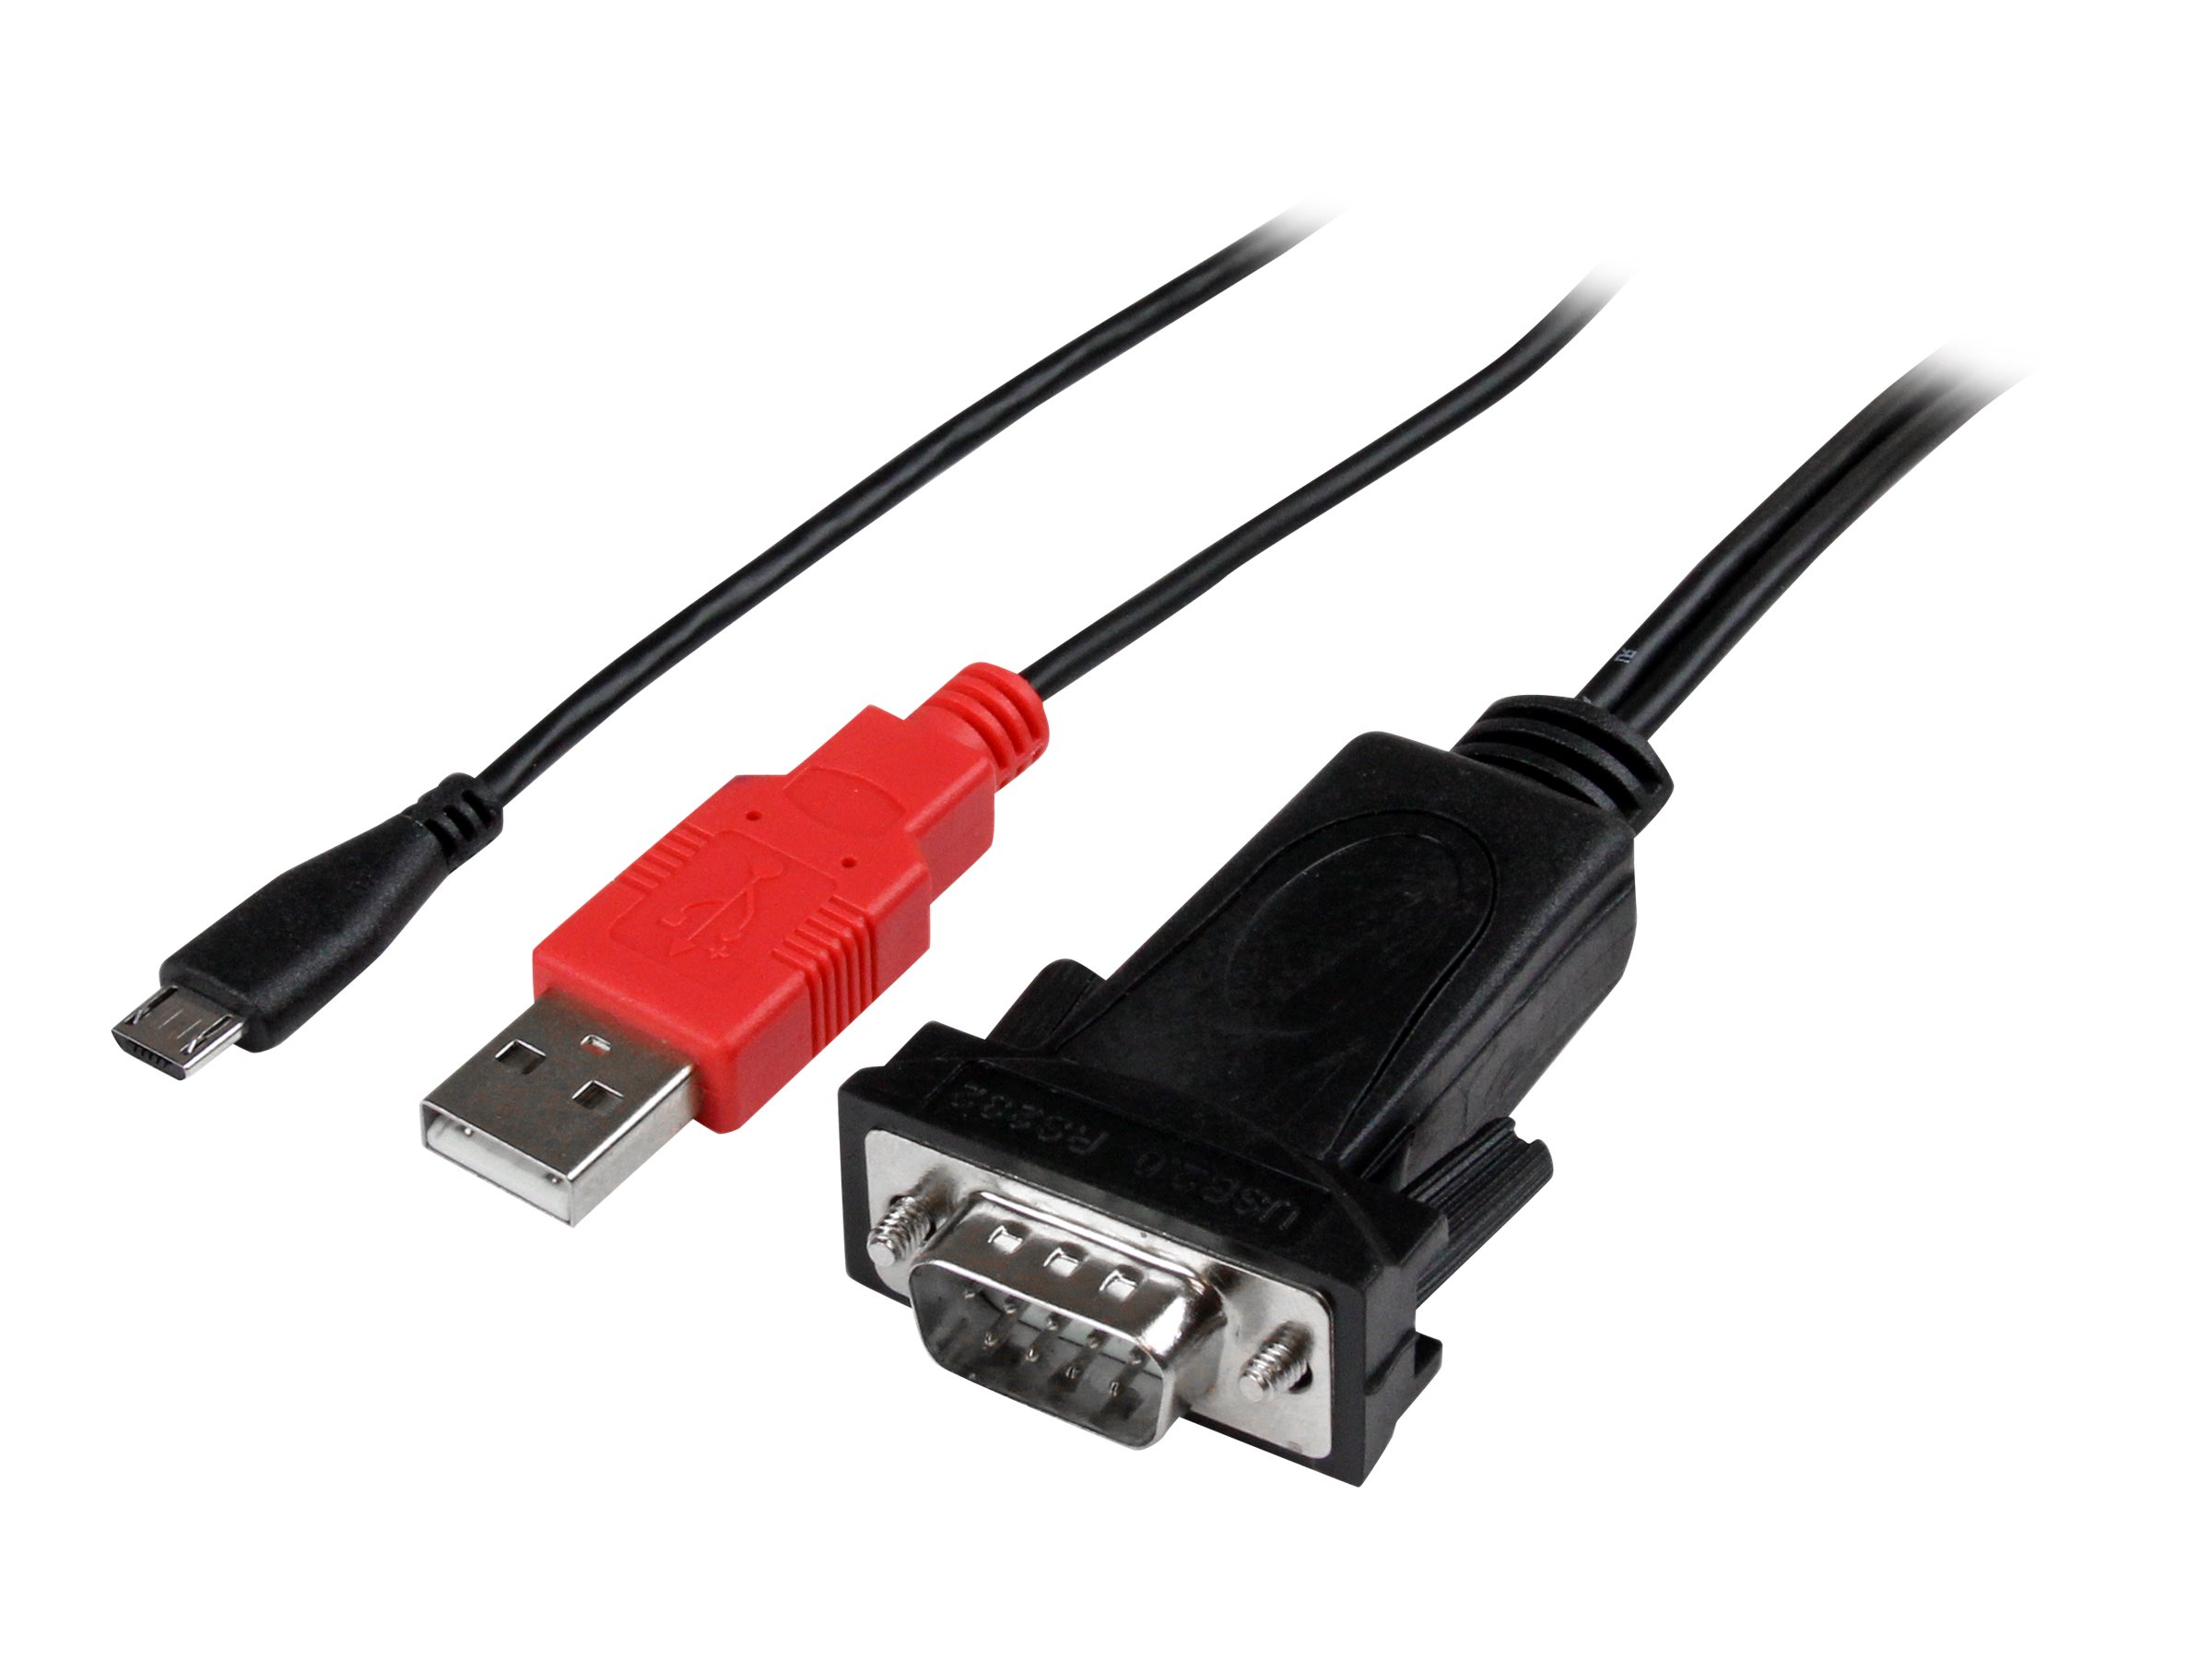 sød smag Synlig karton StarTech.com Micro USB to RS232 DB9 Serial Adapter Cable for Android w/ USB  Charging | www.shi.com